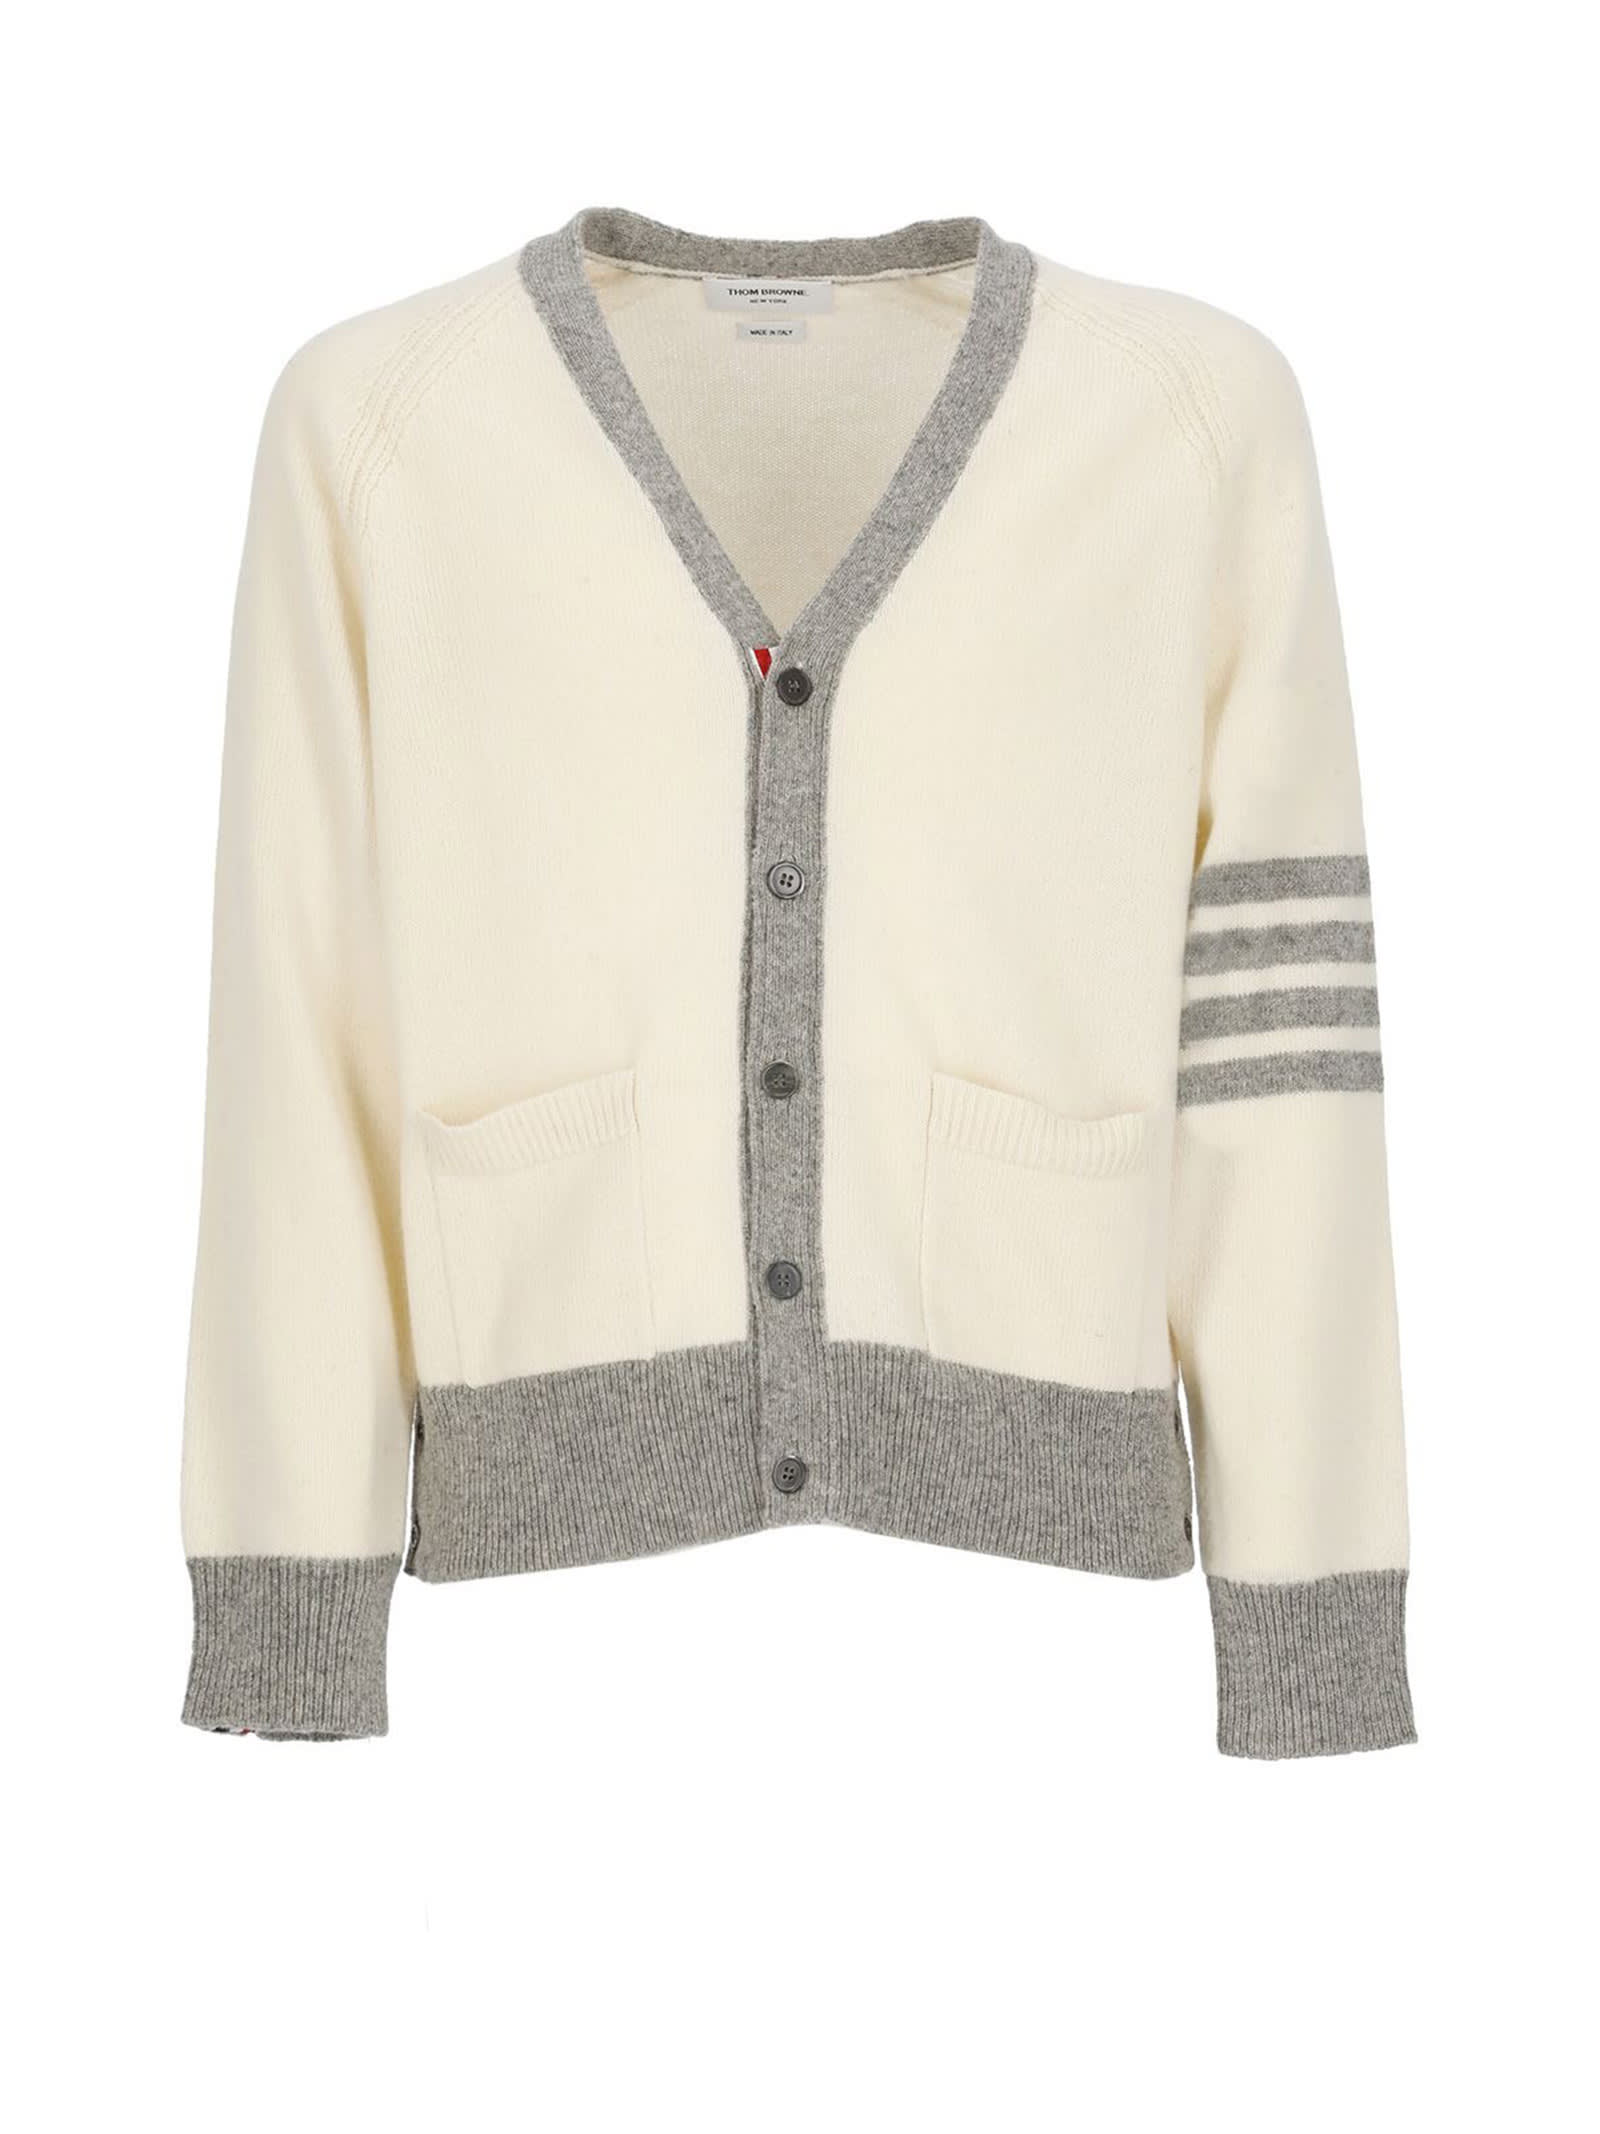 Shop Thom Browne White Gray Buttoned Cardigan